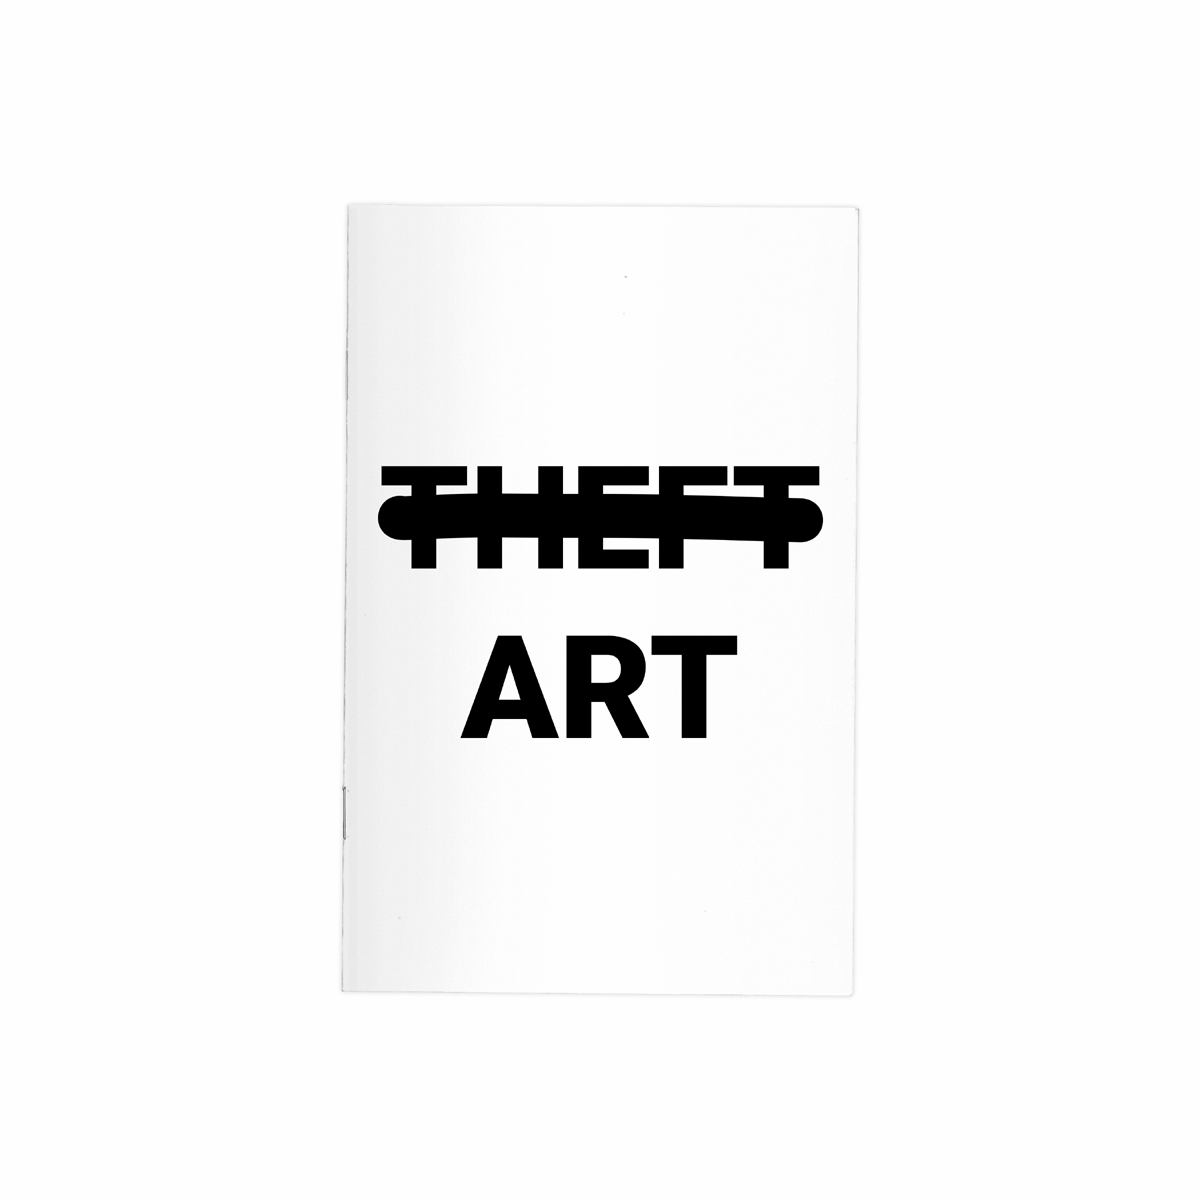 Art is Theft - 16 Page 8.5 x 5.5 in. Saddle-Stitched Booklet.